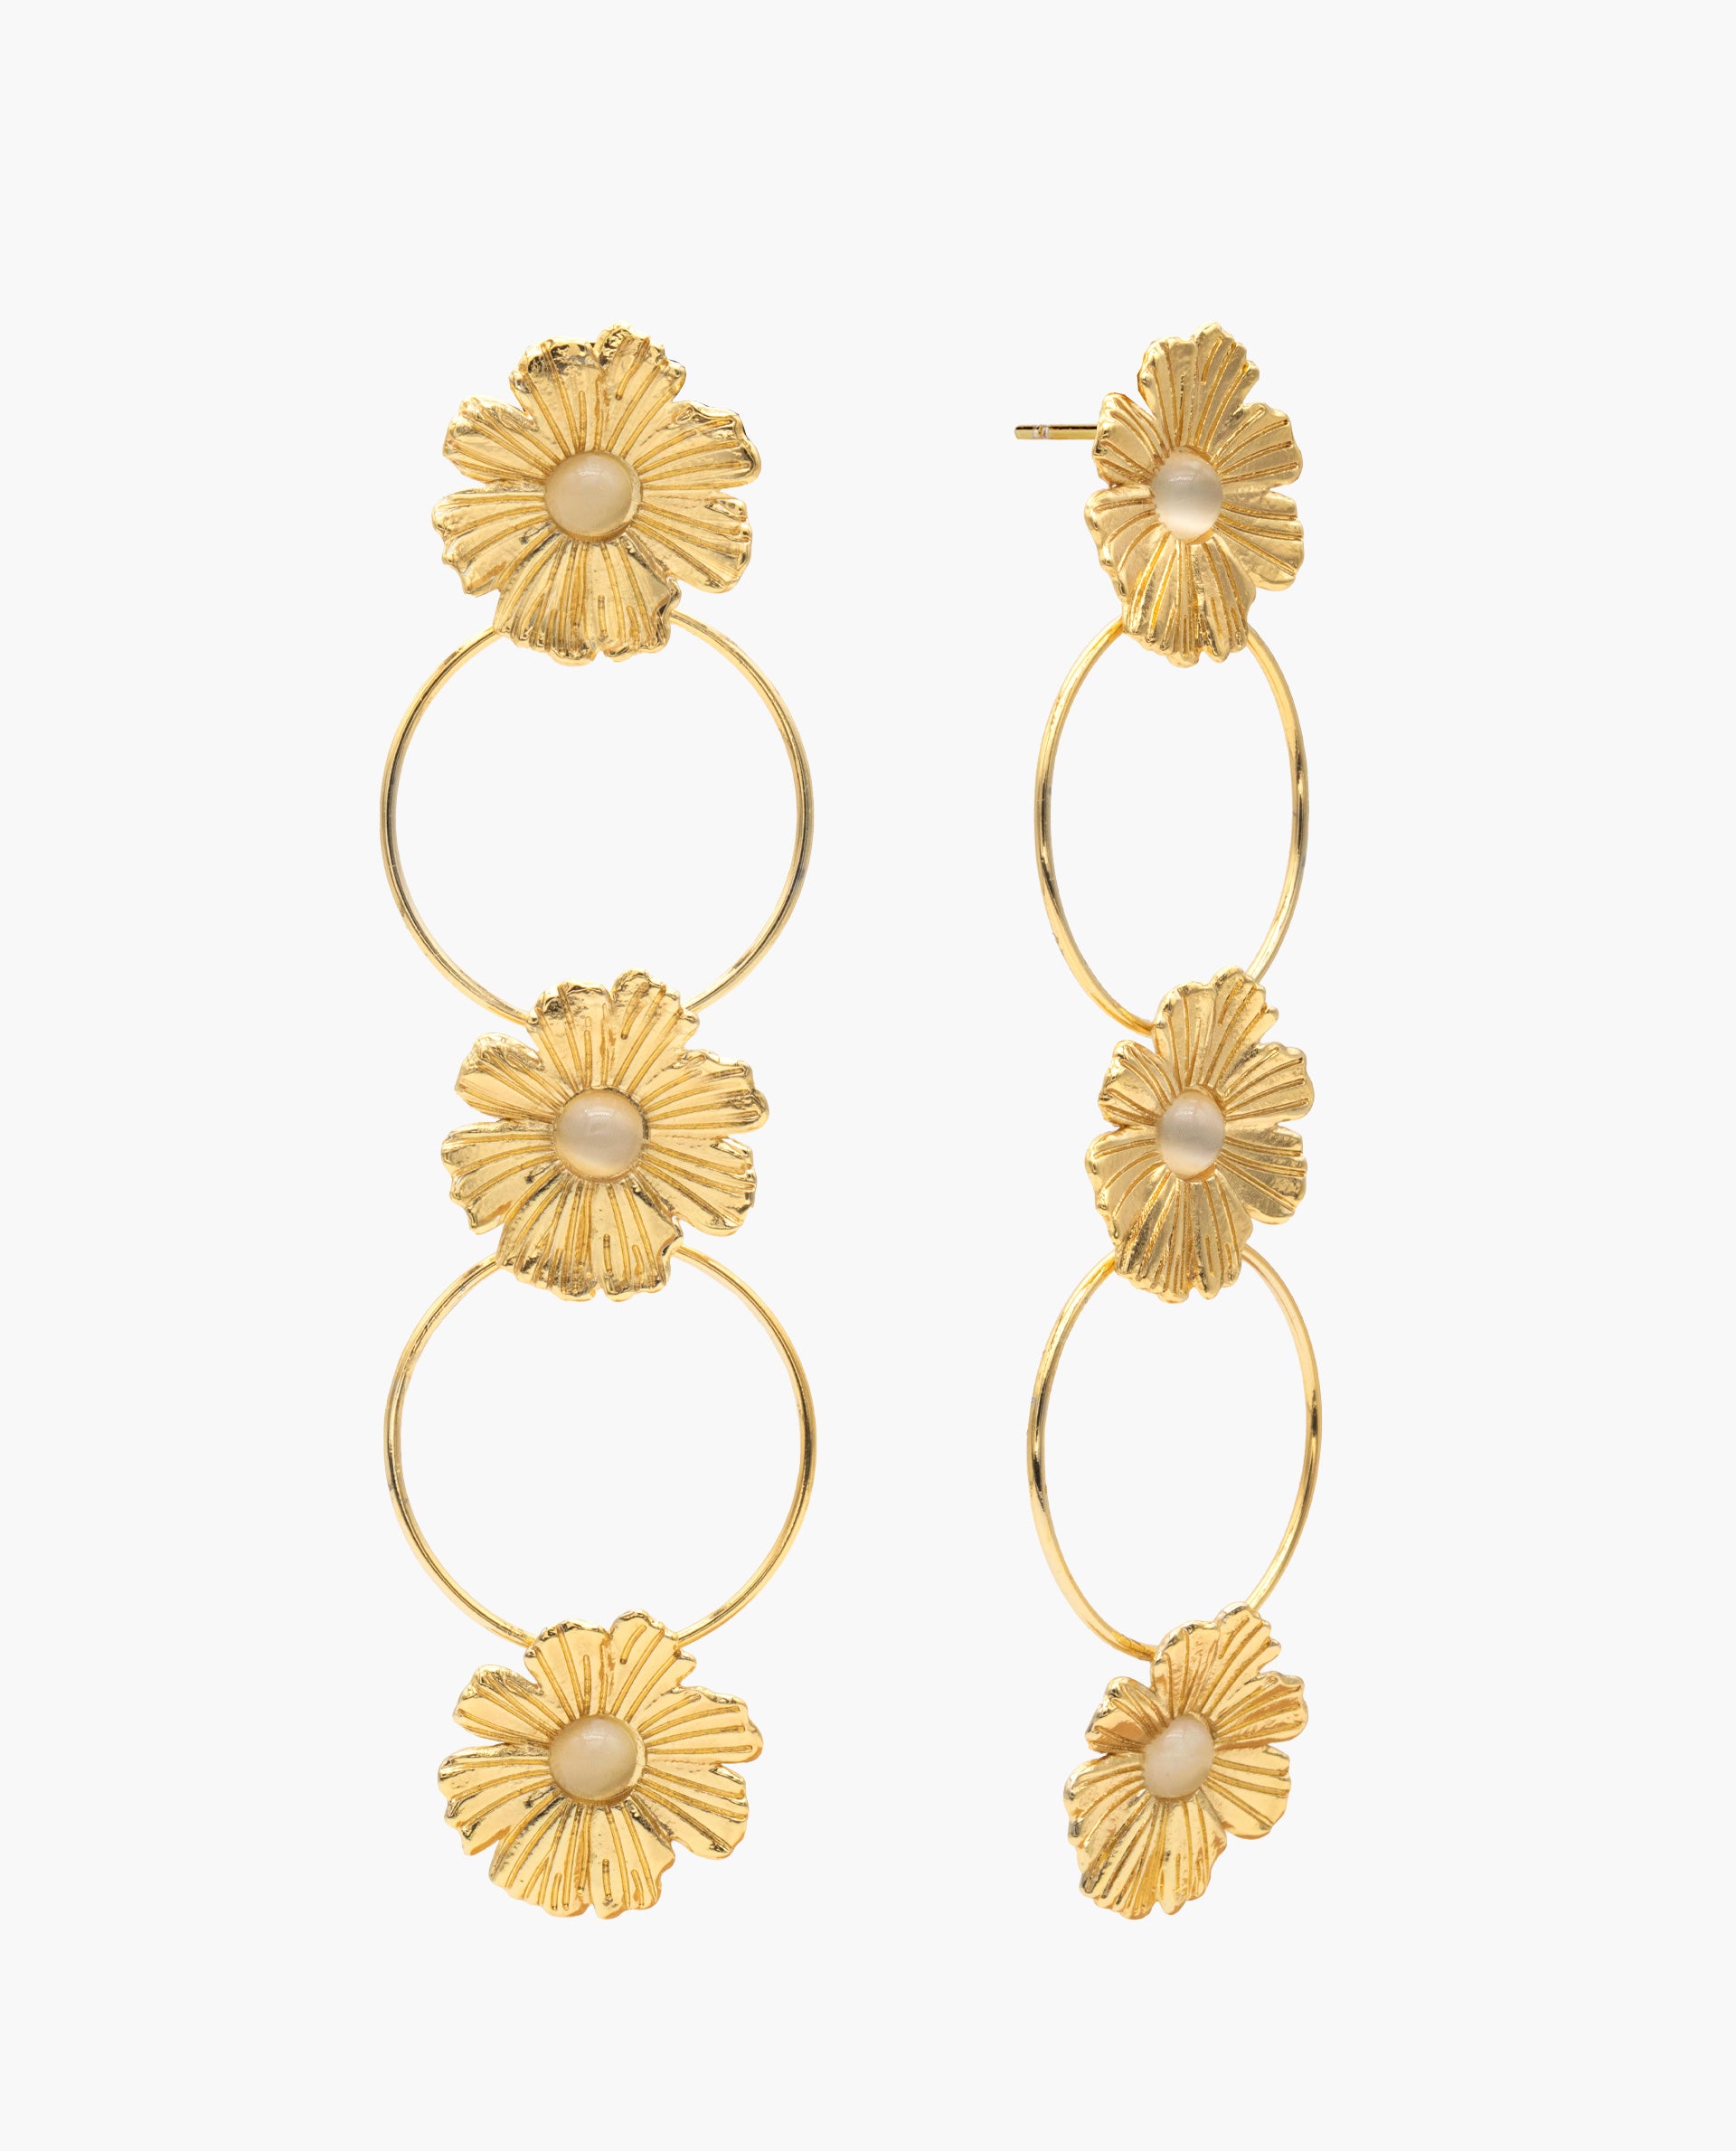 NARCISSUS EARRINGS - GOLD PLATED